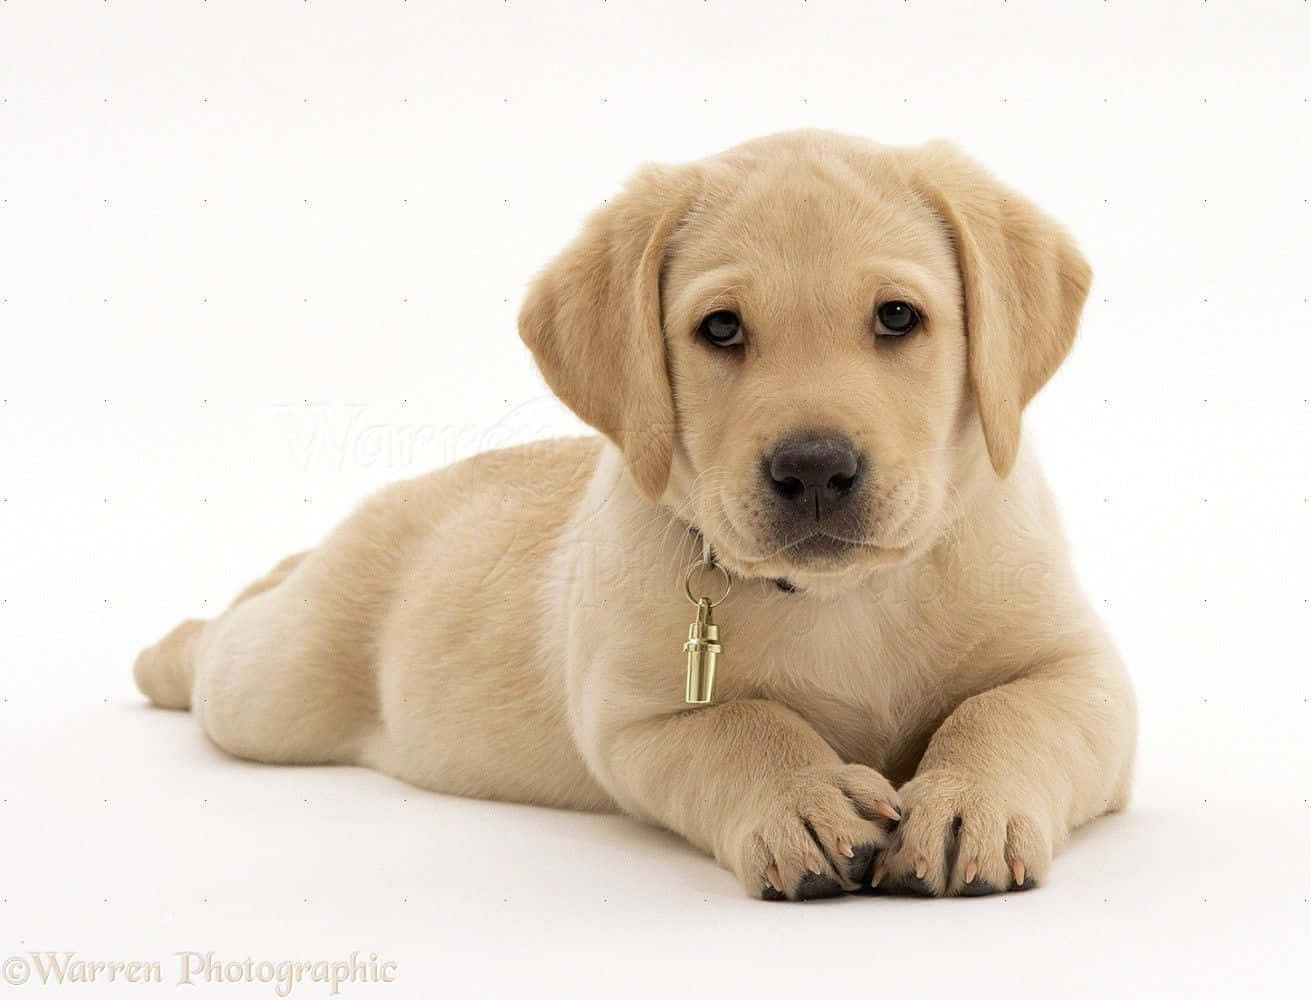 A baby Labrador puppy that's sure to bring joy to your life.